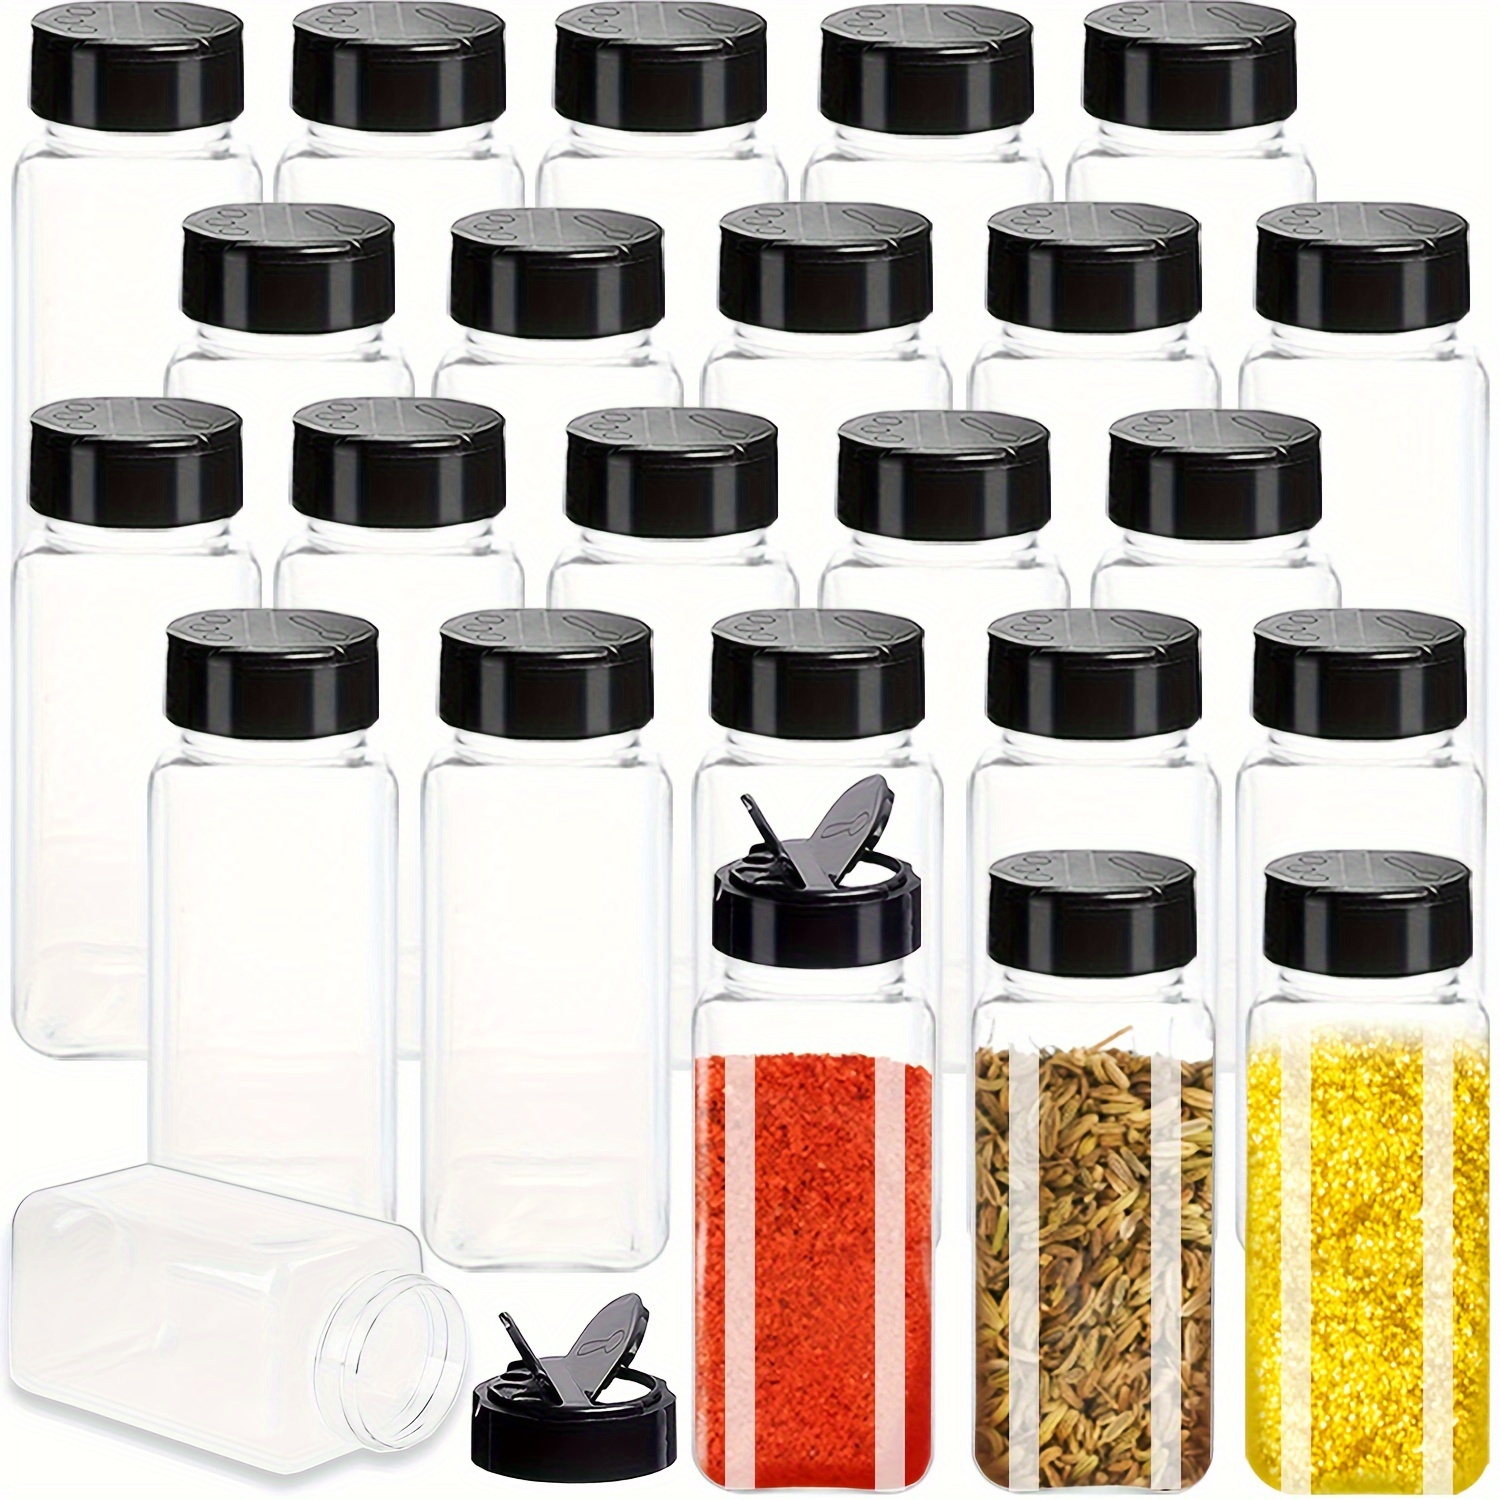 

24-pack 3.5 Oz Plastic Spice Jars With Black Gull Wing Lids, Leak Proof Rectangular Containers - Reusable, Hand Wash Storage For Seasoning, Pepper, Powders - Multipurpose, Food Safe Kitchen Organizer